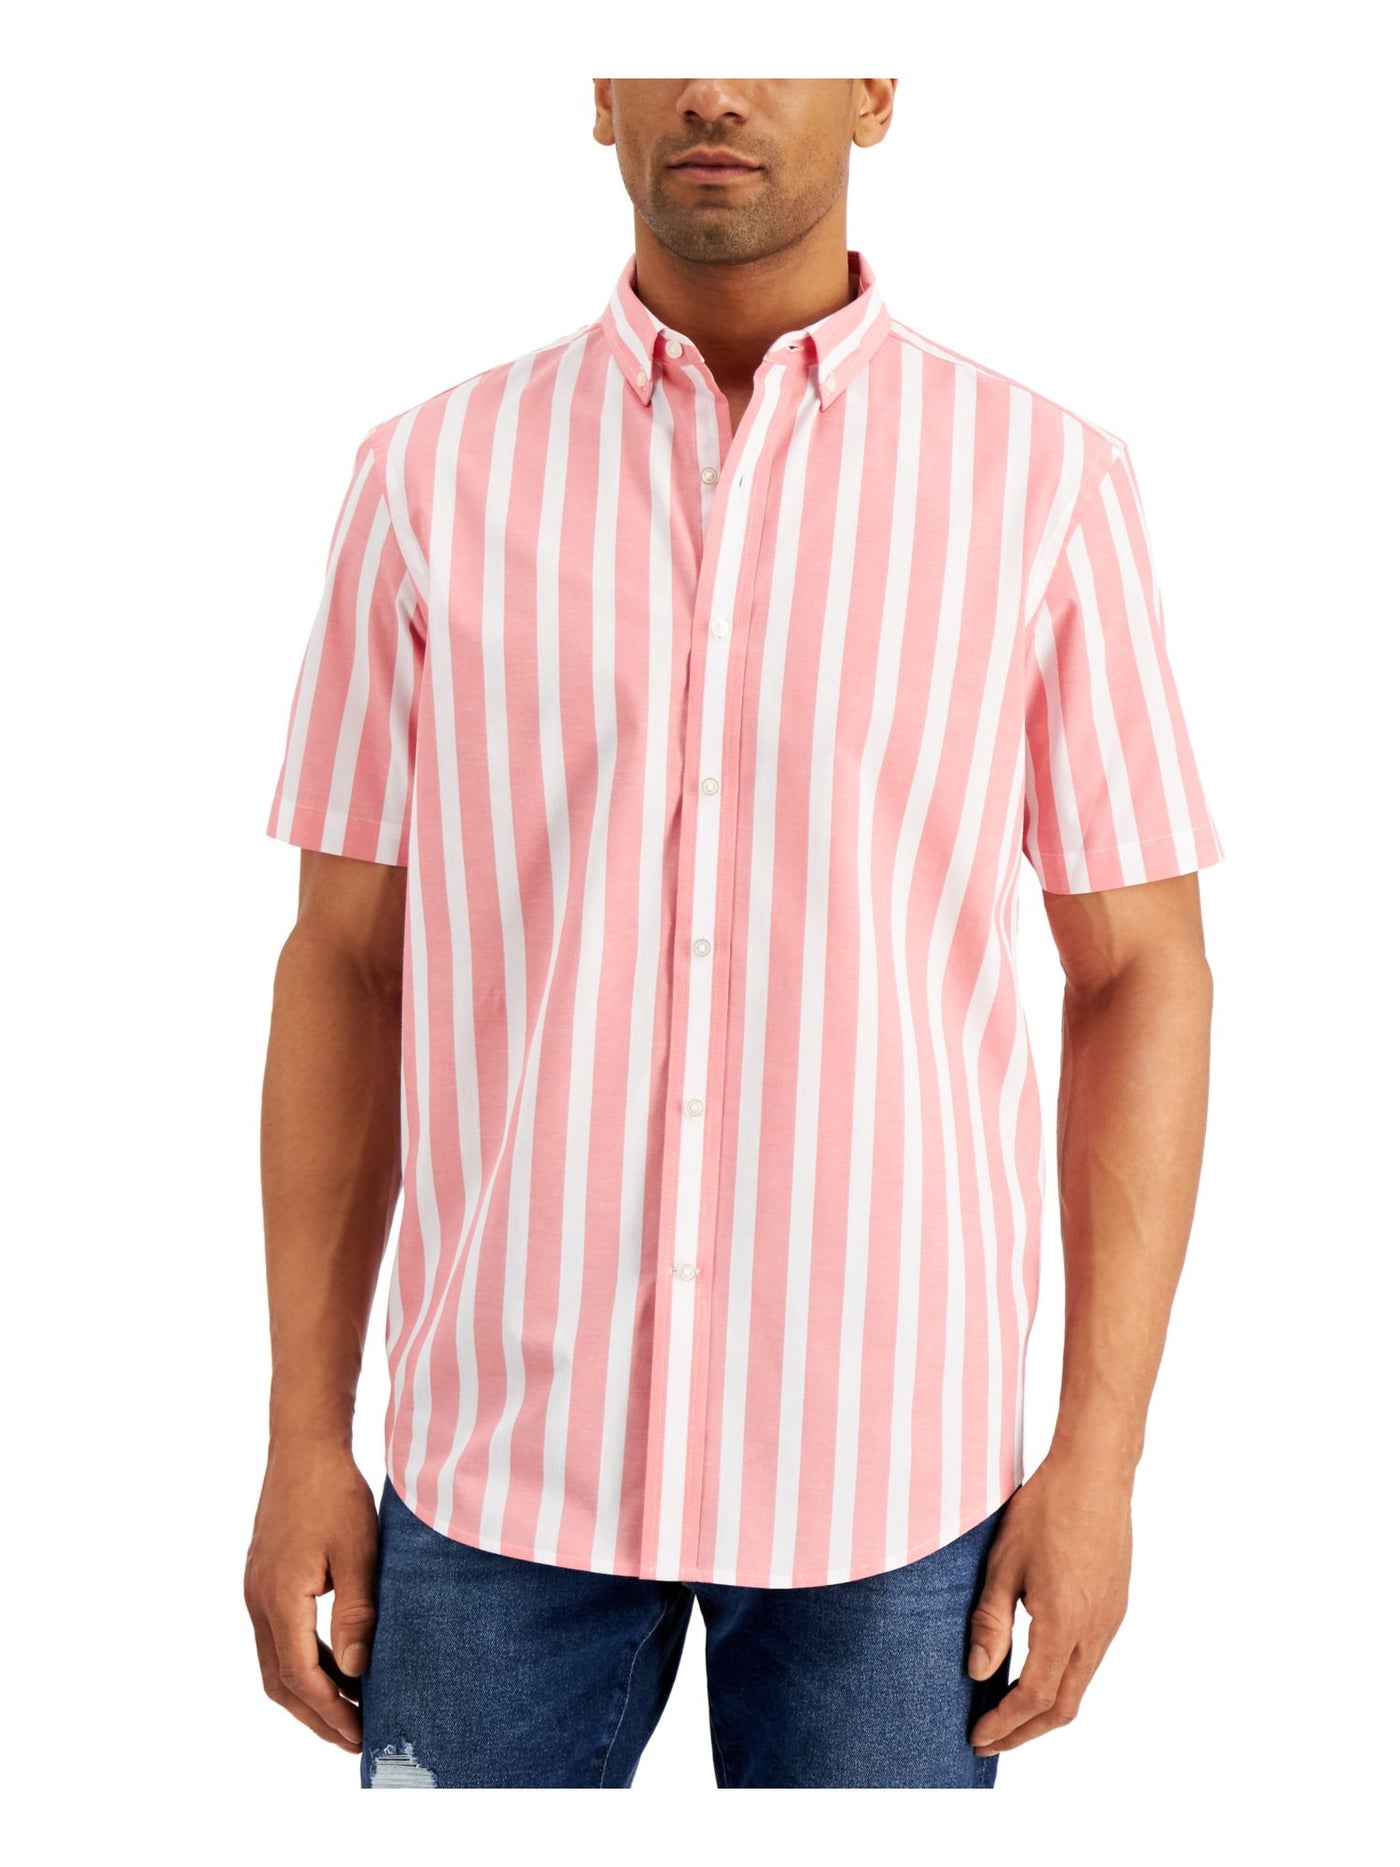 CLUBROOM Mens Pink Striped Collared Classic Fit Dress Shirt M